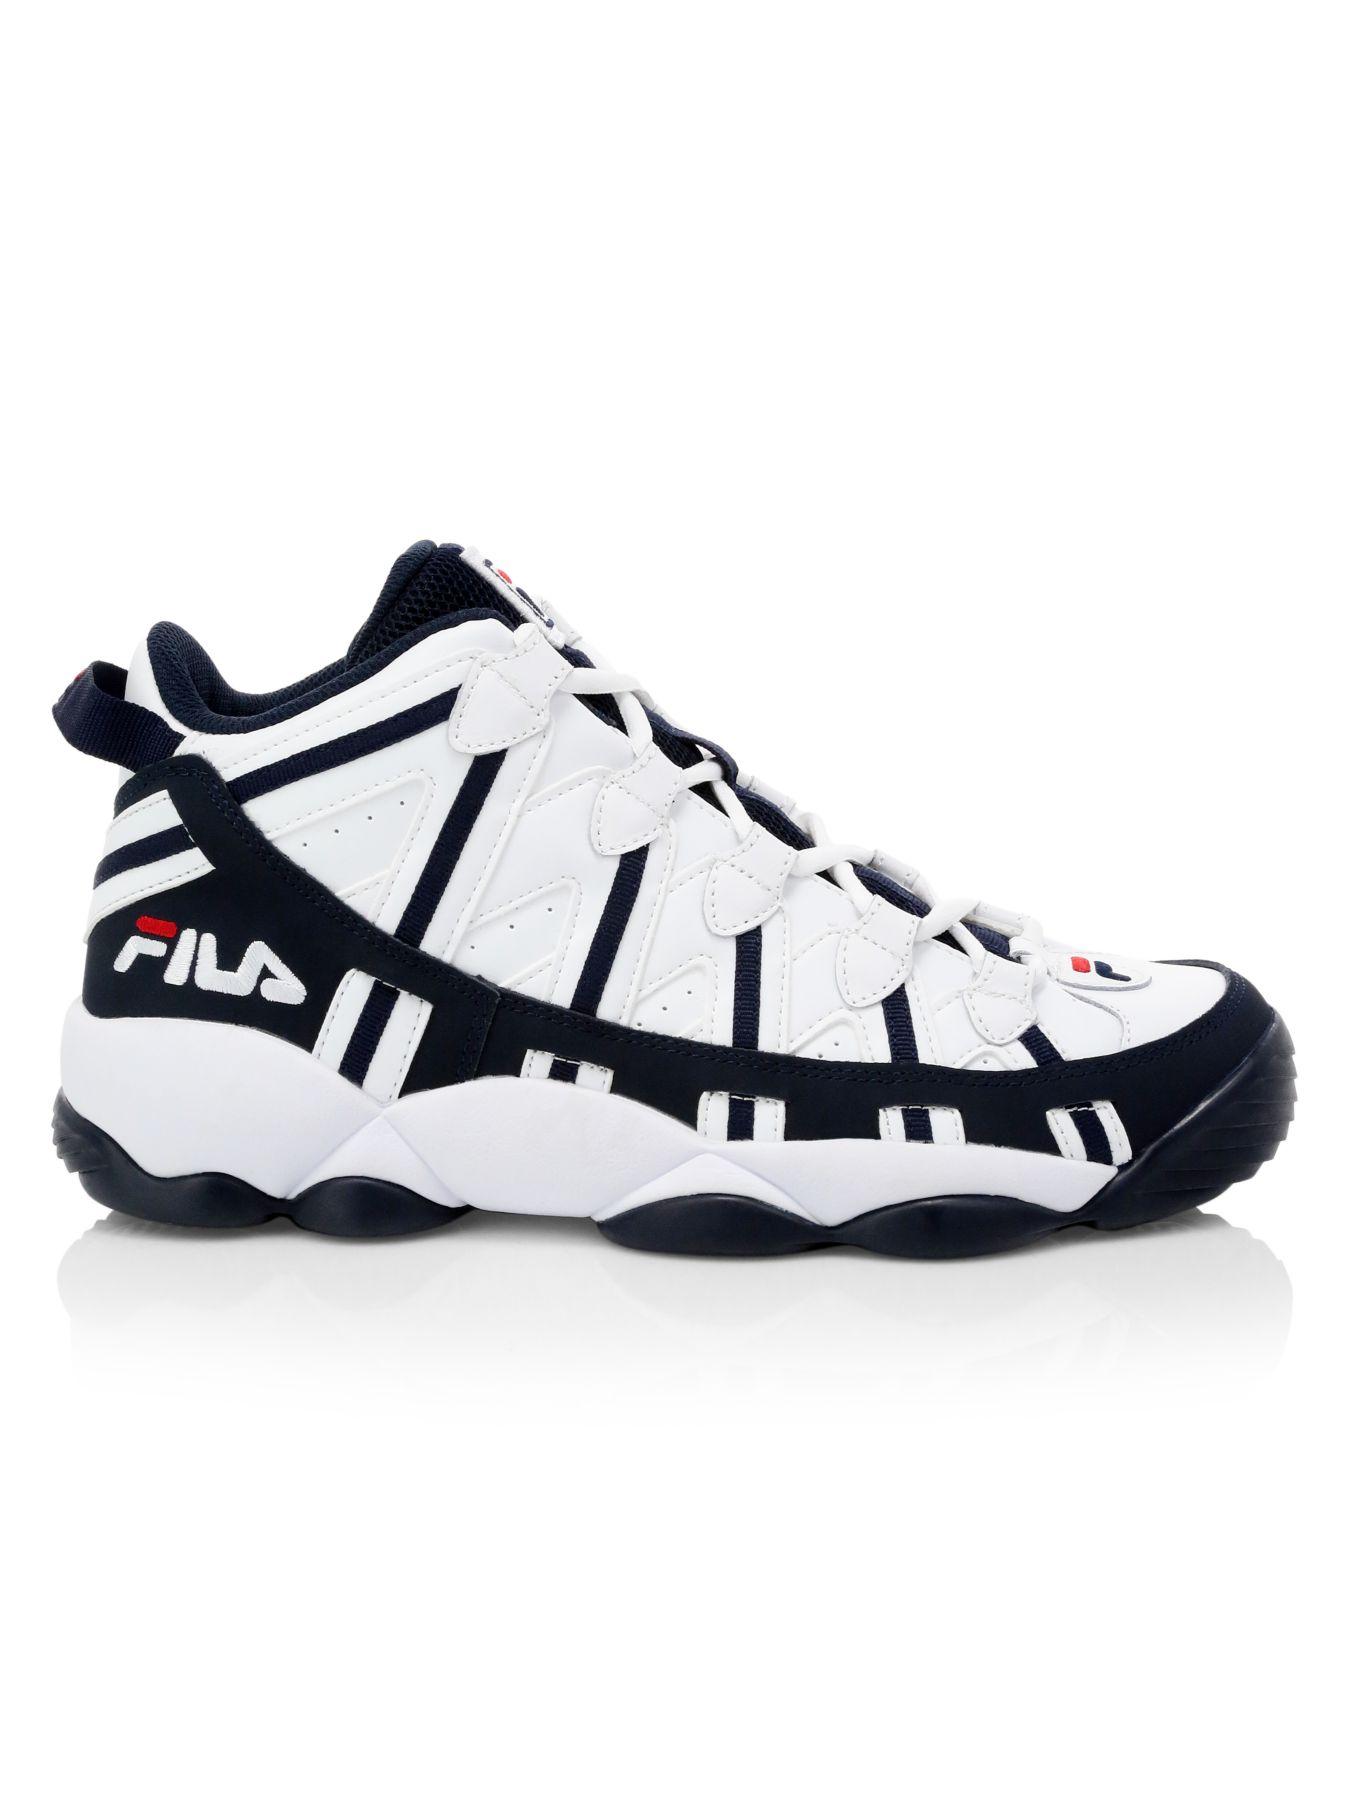 Fila Leather Stackhouse Spaghetti Sneakers in White Navy Red (Blue) for ...